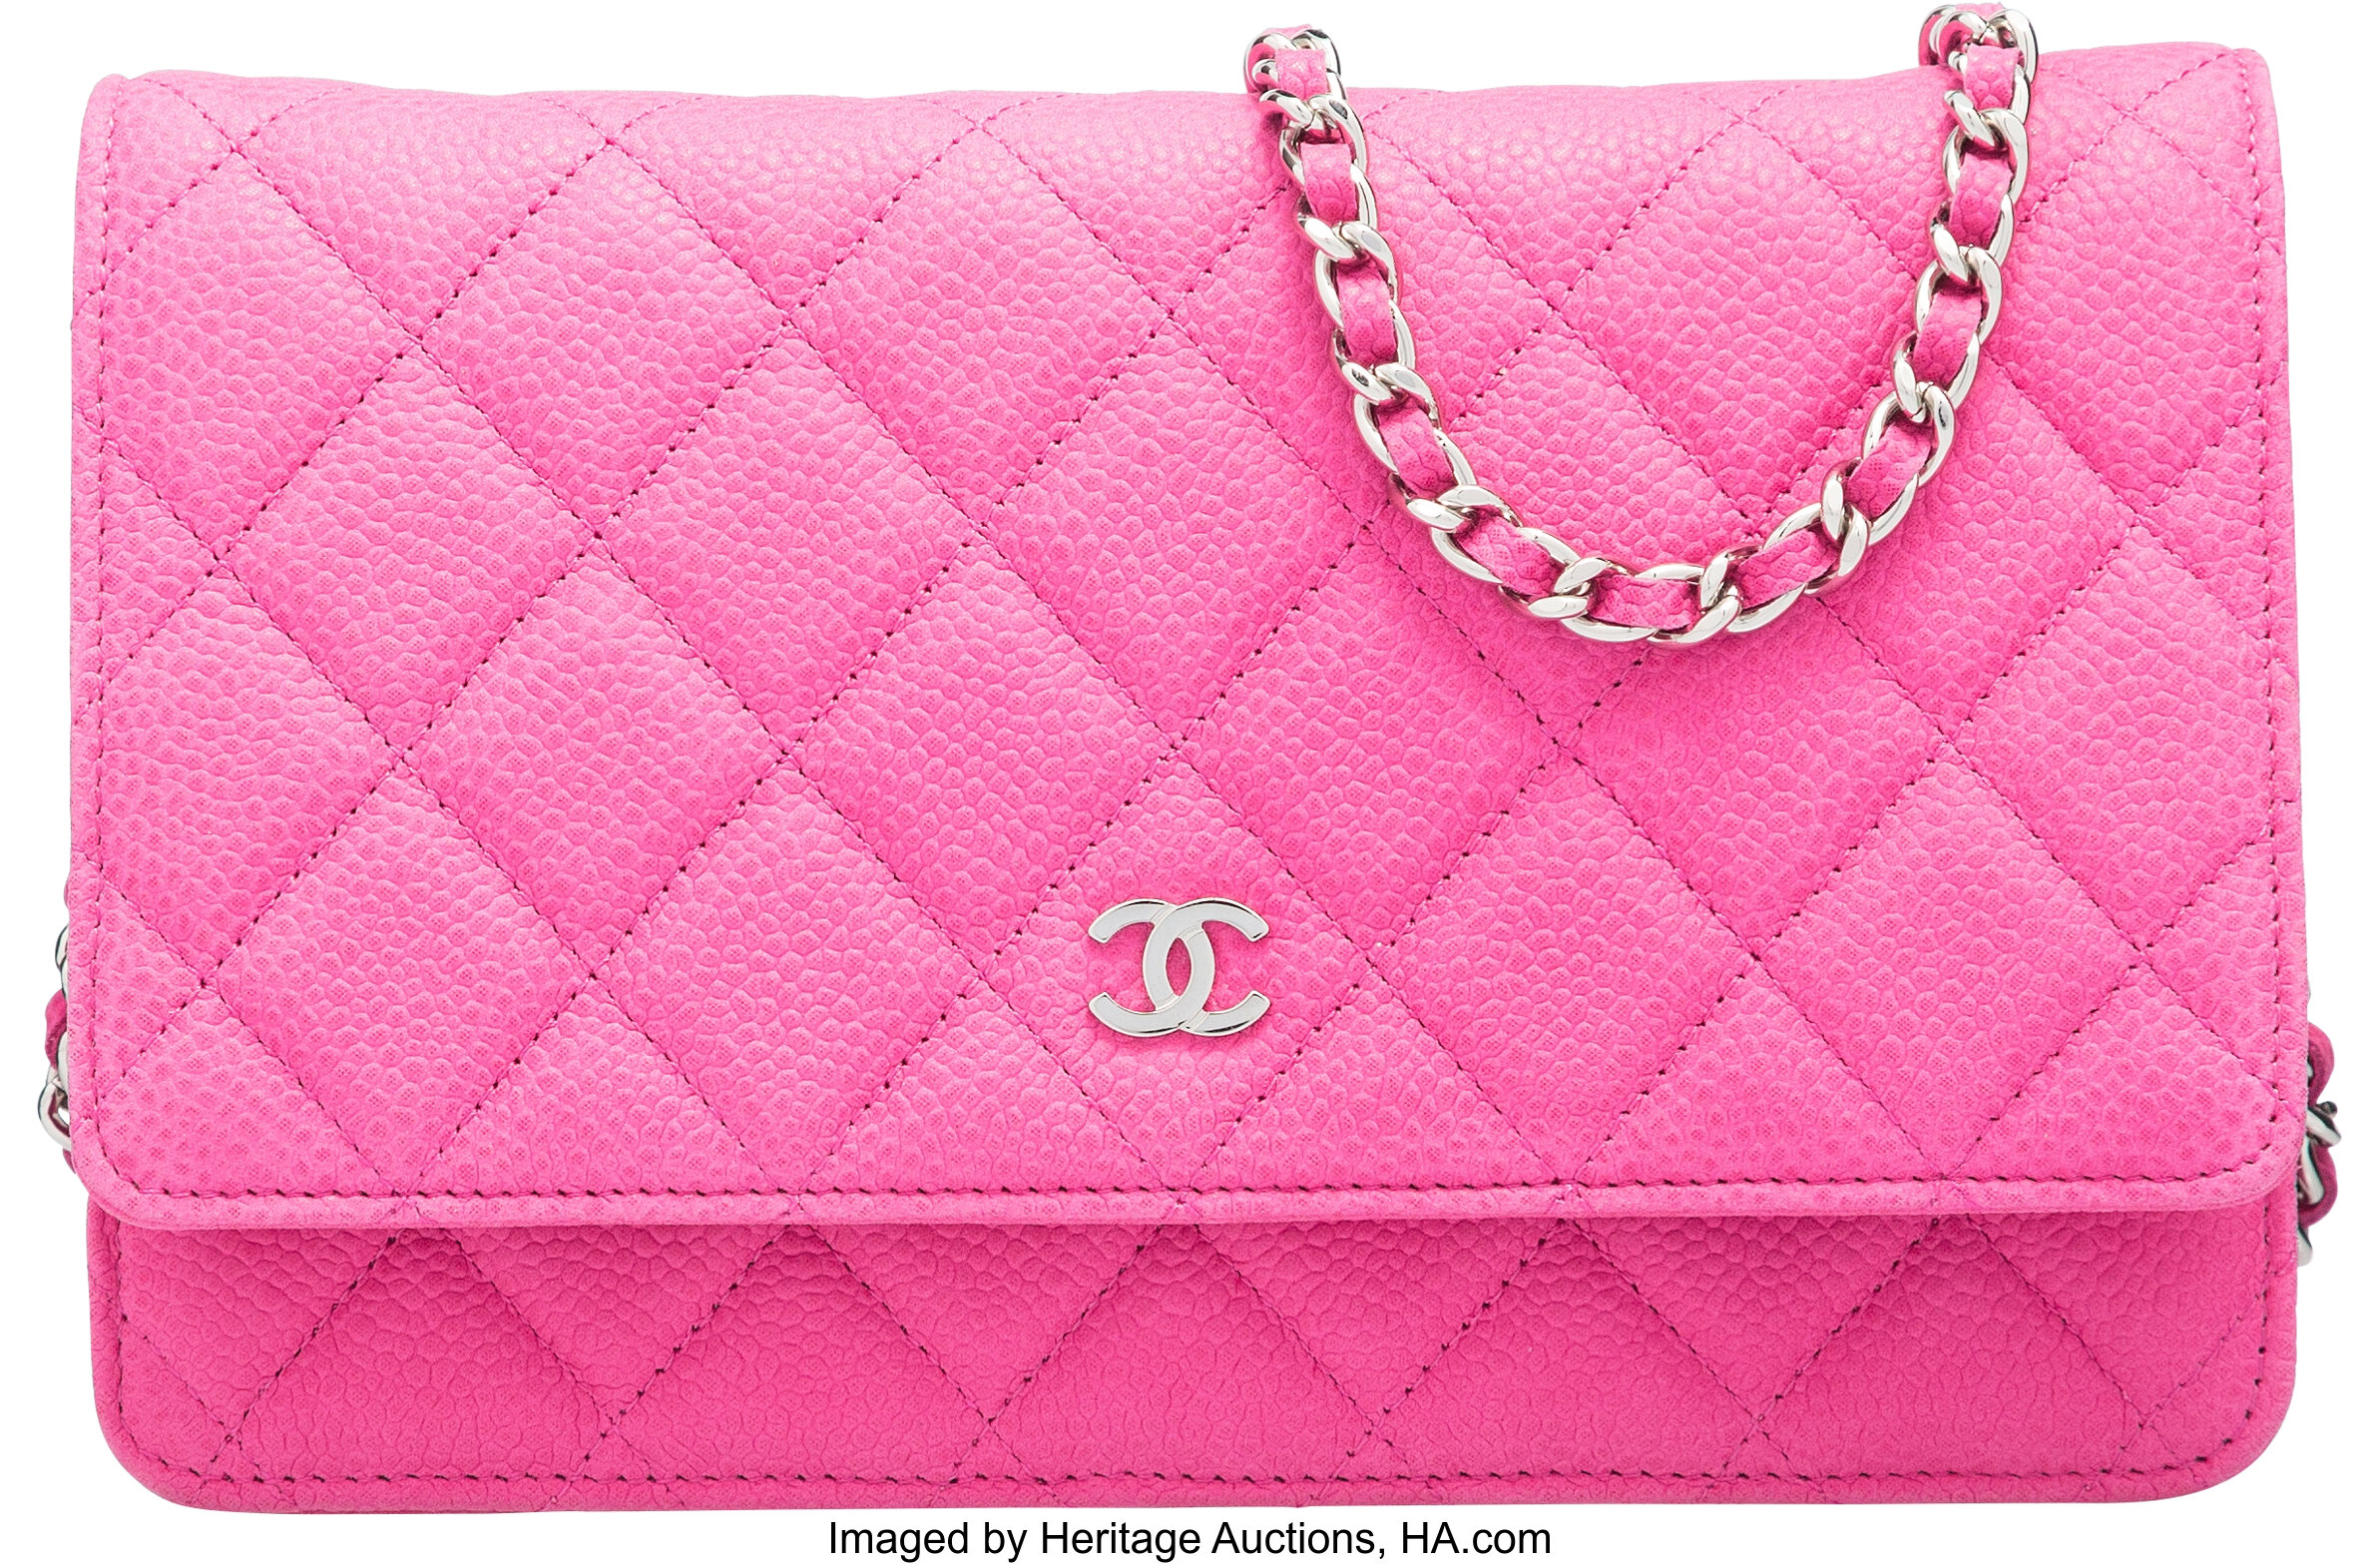 Chanel Matte Pink Quilted Caviar Leather Wallet on Chain Bag